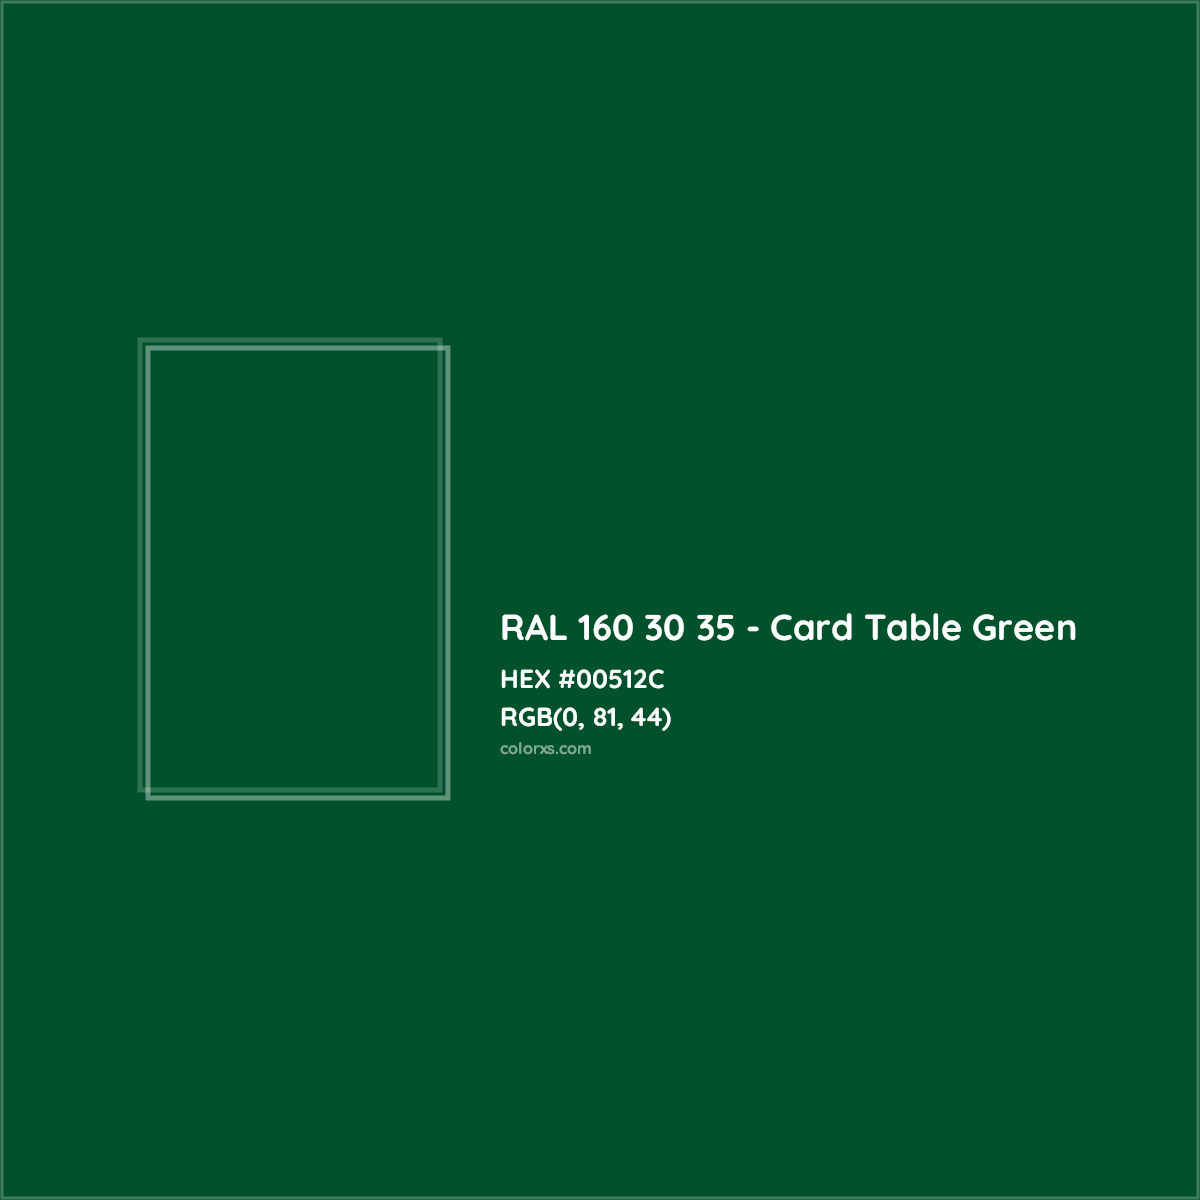 HEX #00512C RAL 160 30 35 - Card Table Green CMS RAL Design - Color Code